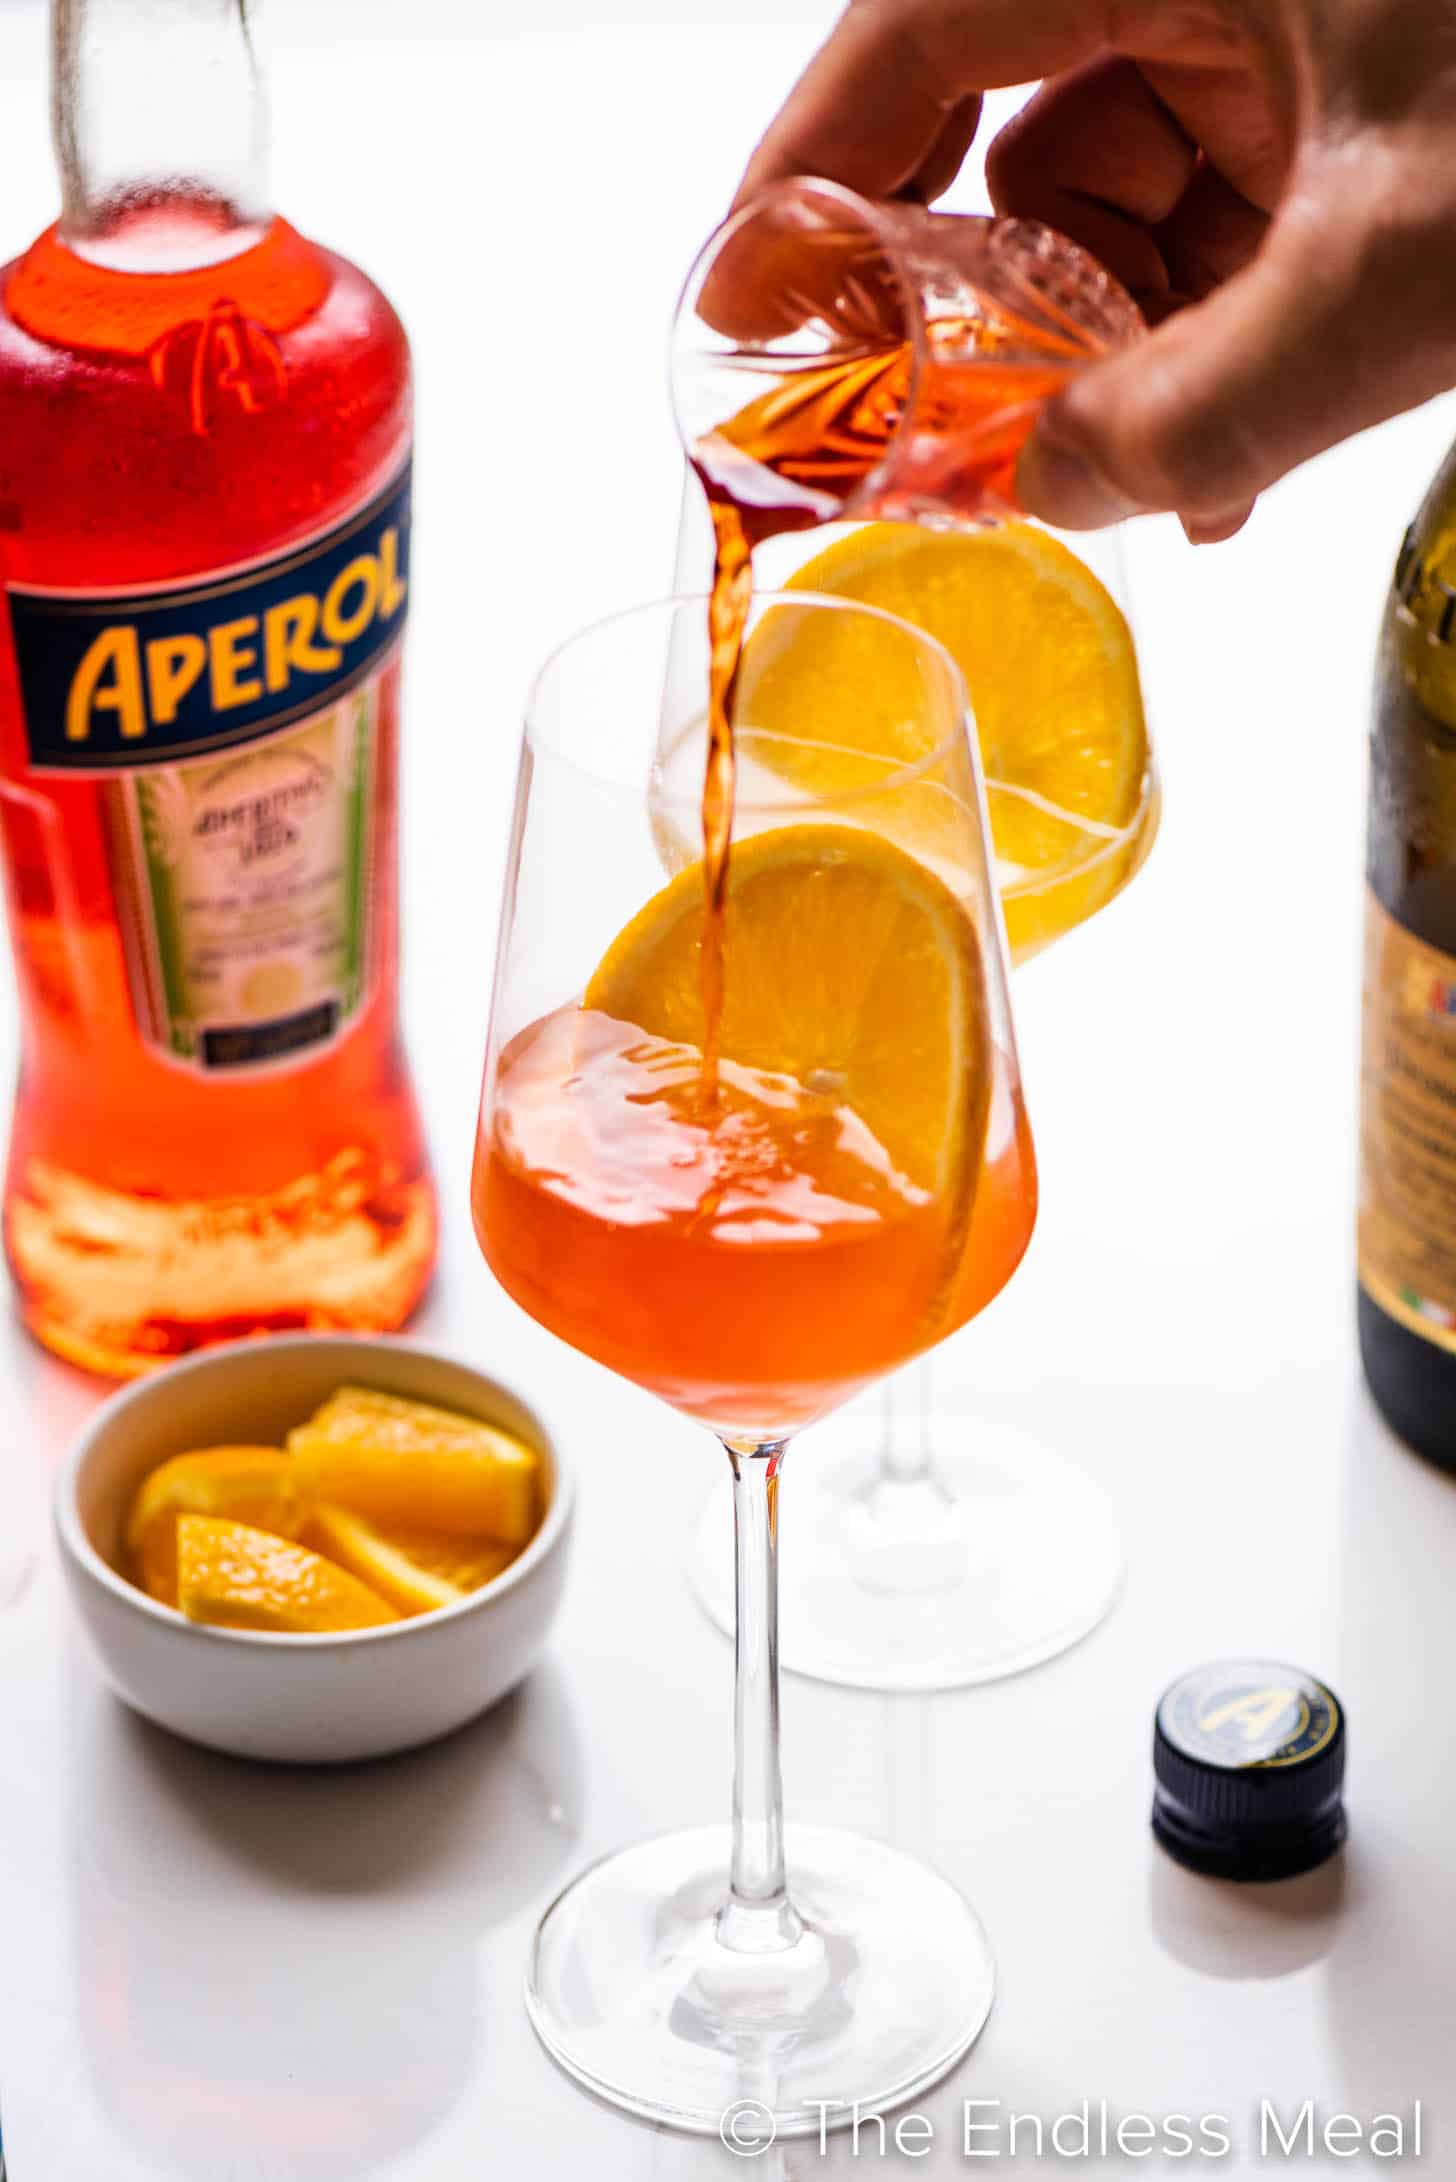 pouring aperol into a wine glass